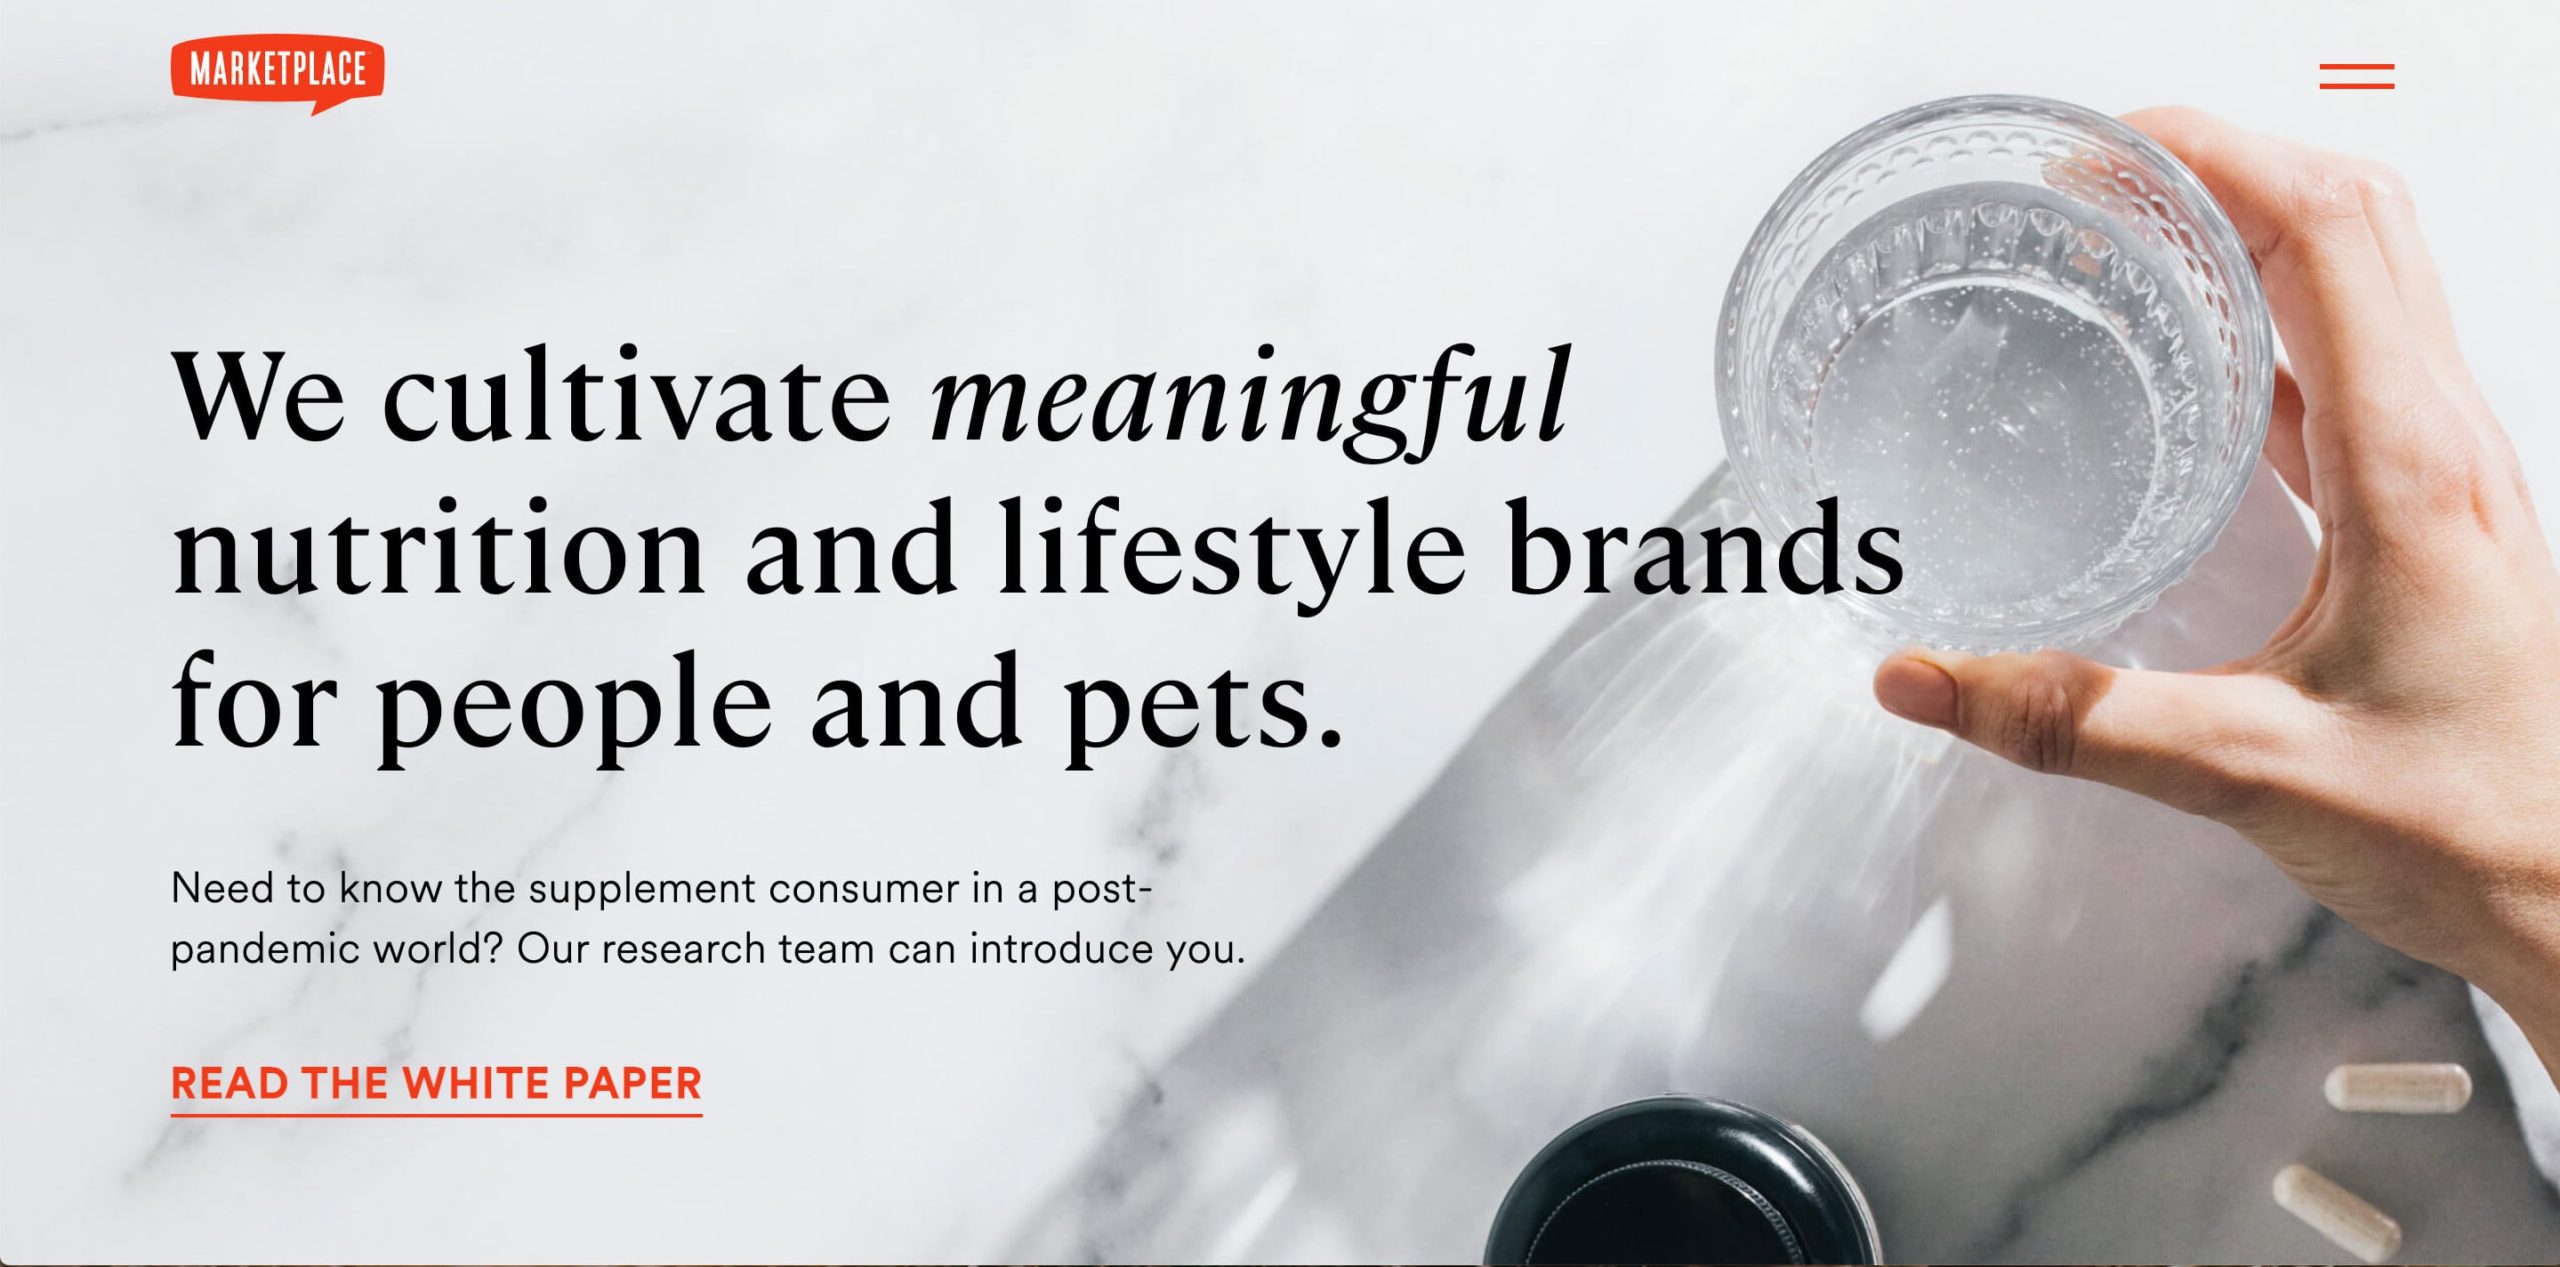 Branding and Marketing for Pets, Food, and Supplements | MarketPlace